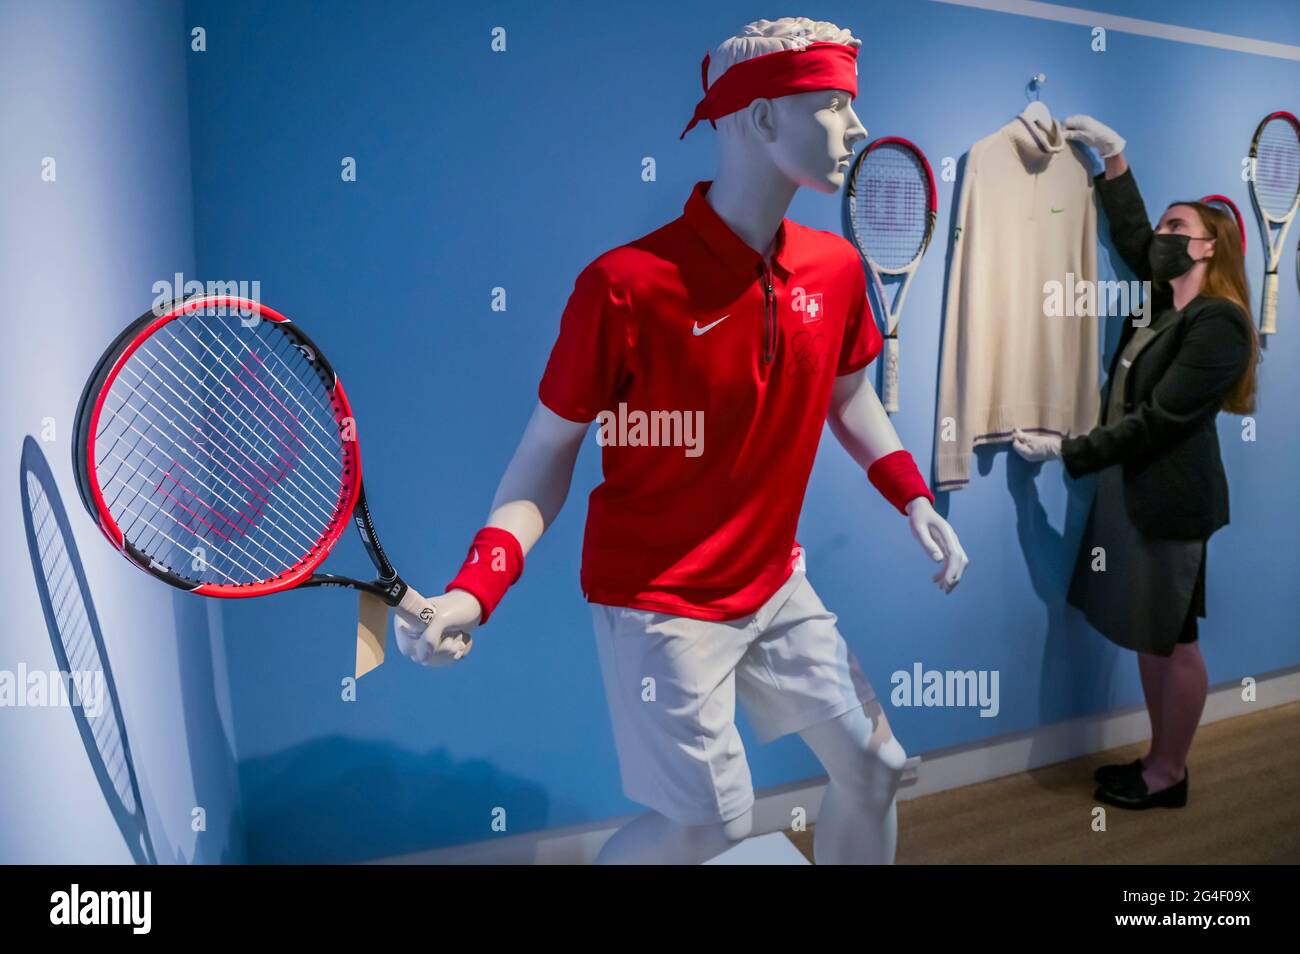 ROGER FEDERERS CHAMPION OUTFIT AND RACKET, DAVIS CUP, 2014